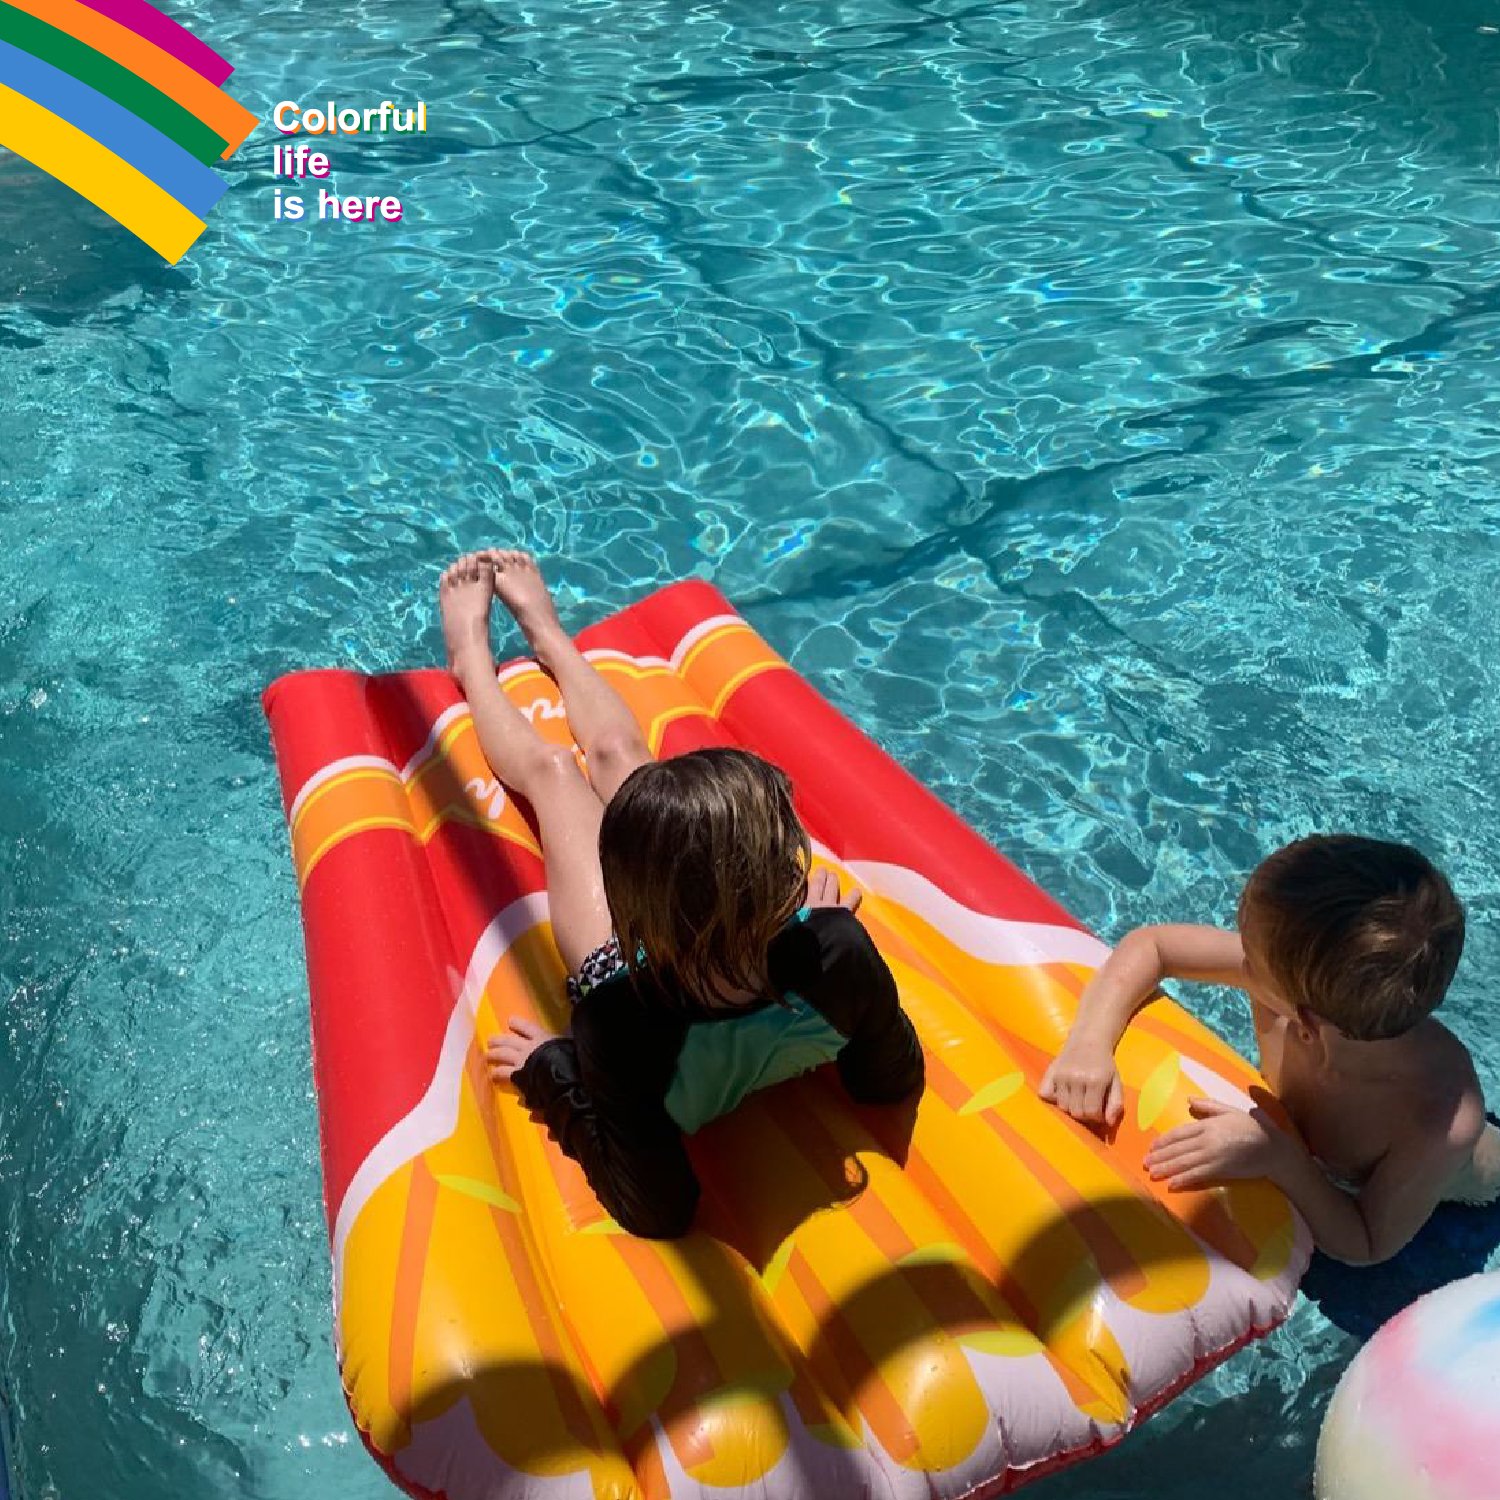 Inflatable Donut Chocolate Strawberry Swim Rings of 33 Inches for Party XFlated Donut Float Pool or Beach Toy for Kids